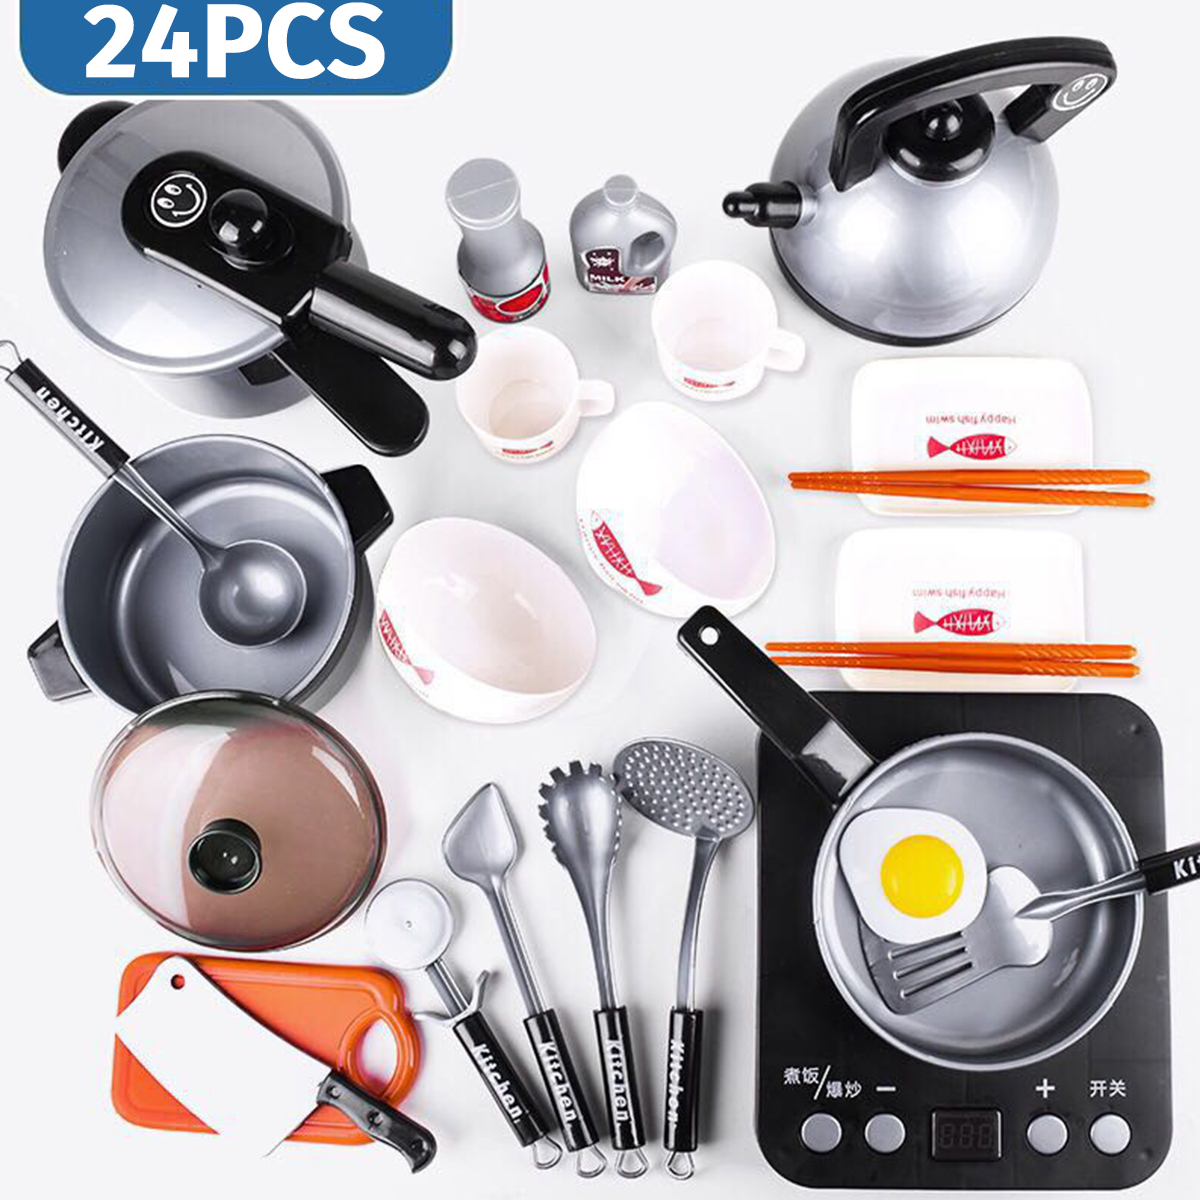 2436Pcs-Simulation-Kitchen-Cooking-Pretend-Play-Set-Educational-Toy-with-Sound-Light-Effect-for-Kids-1829731-1